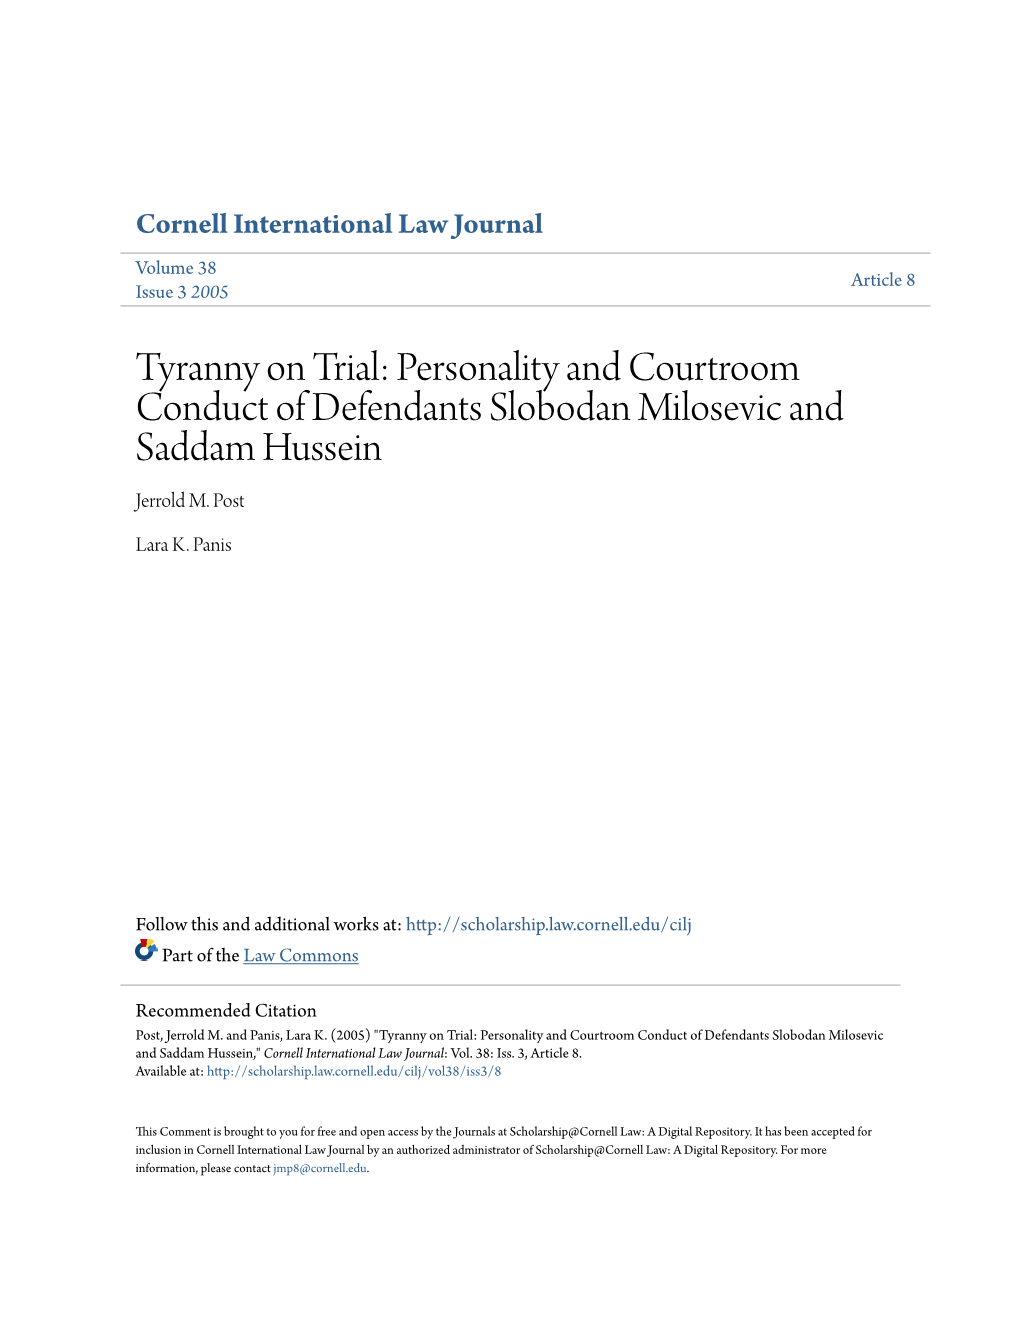 Personality and Courtroom Conduct of Defendants Slobodan Milosevic and Saddam Hussein Jerrold M